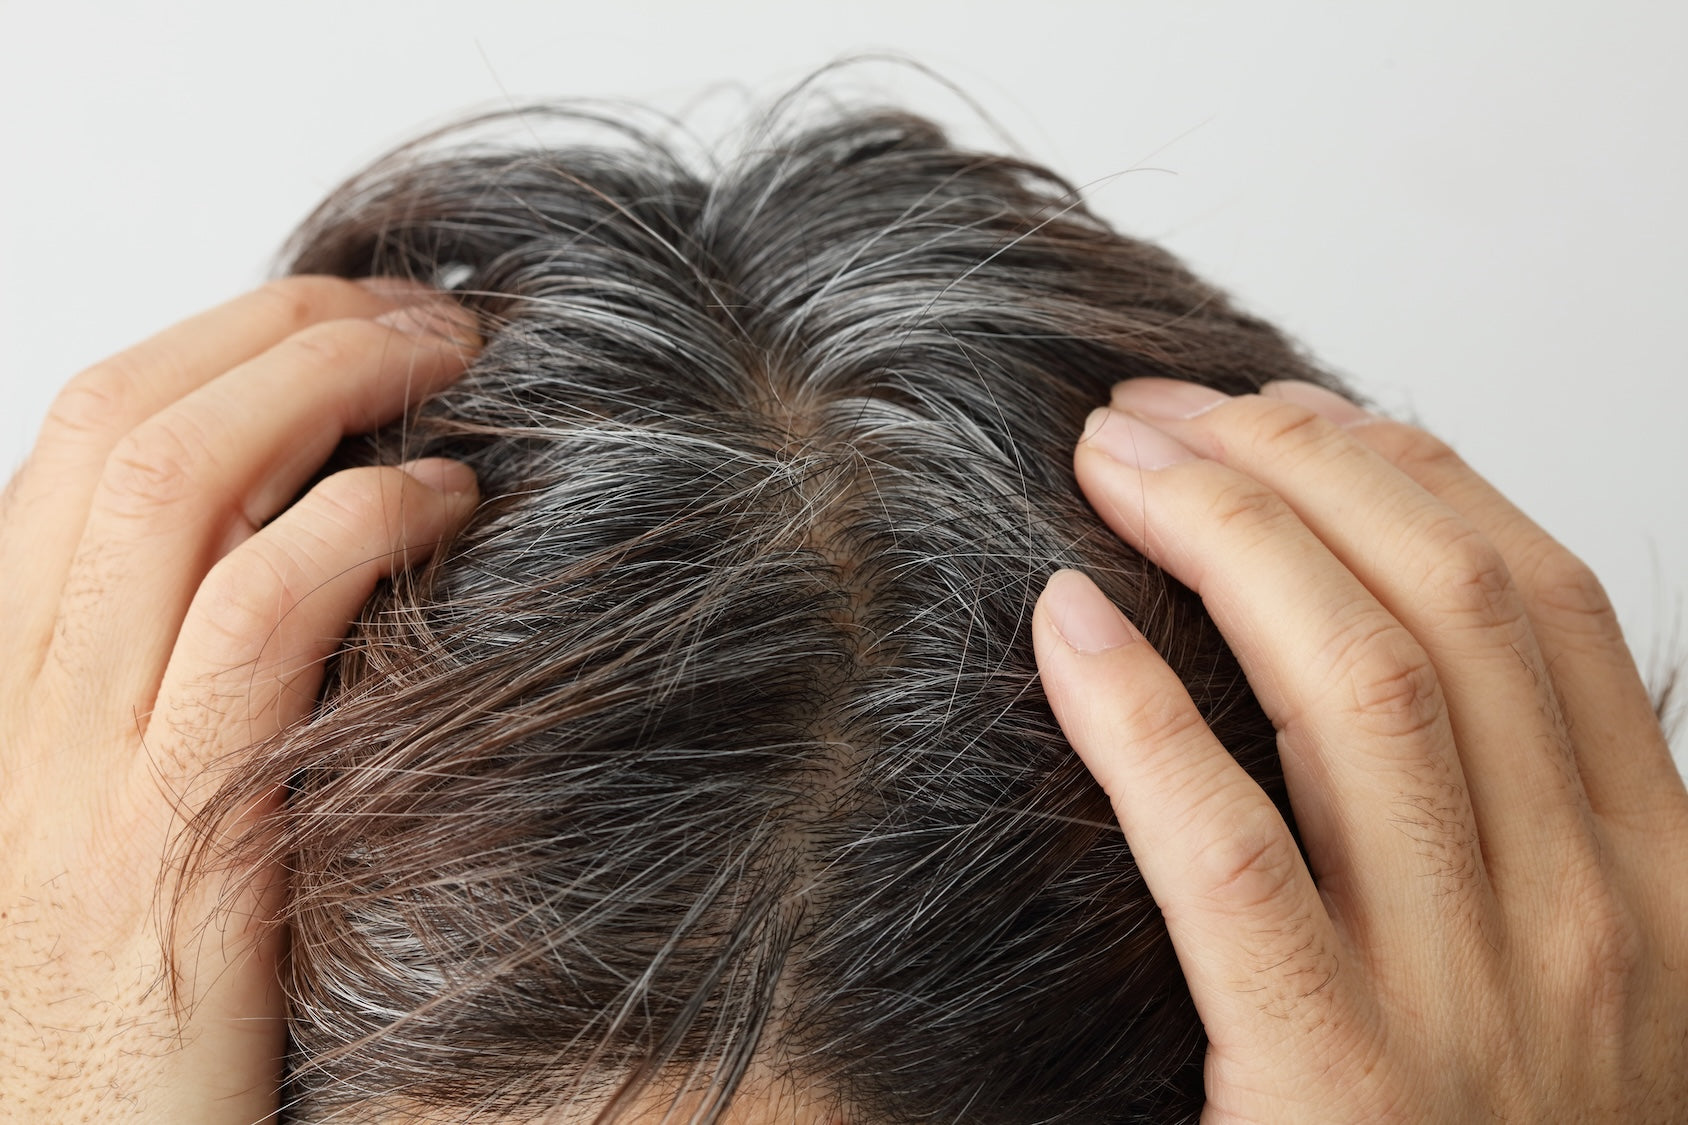 A Topical Formulation That Reverses Premature Hair Graying?